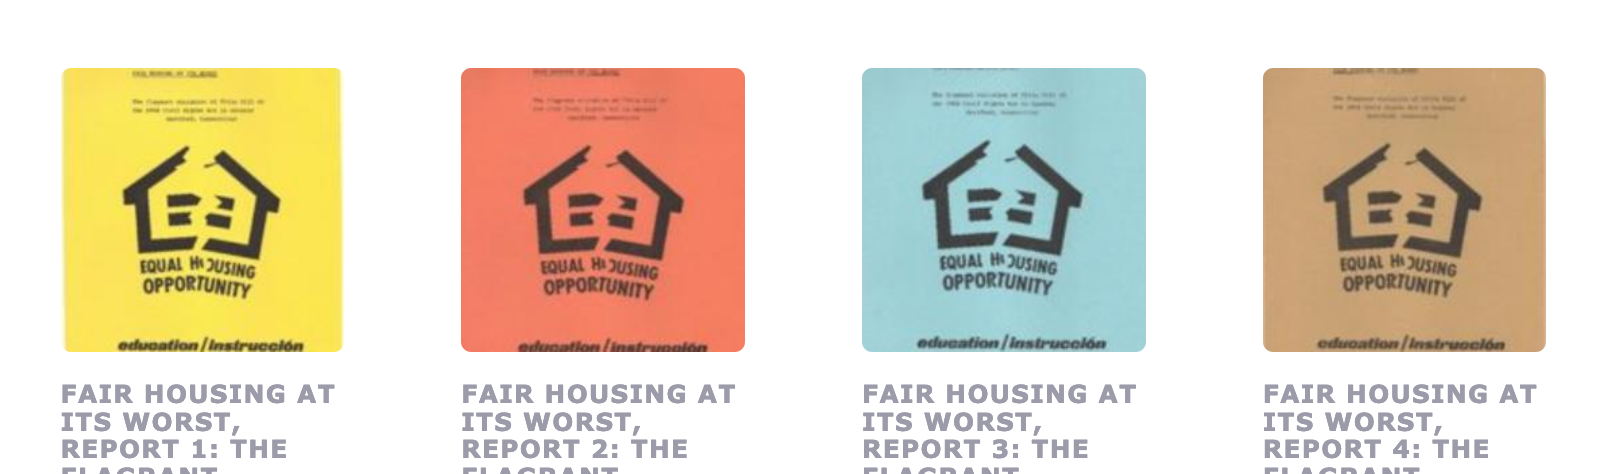 Explore the “Fair Housing At Its Worst” series of ten reports, based on originals in the Boyd Hinds Papers at the Hartford History Center, and shared online through the Connecticut Digital Archive.